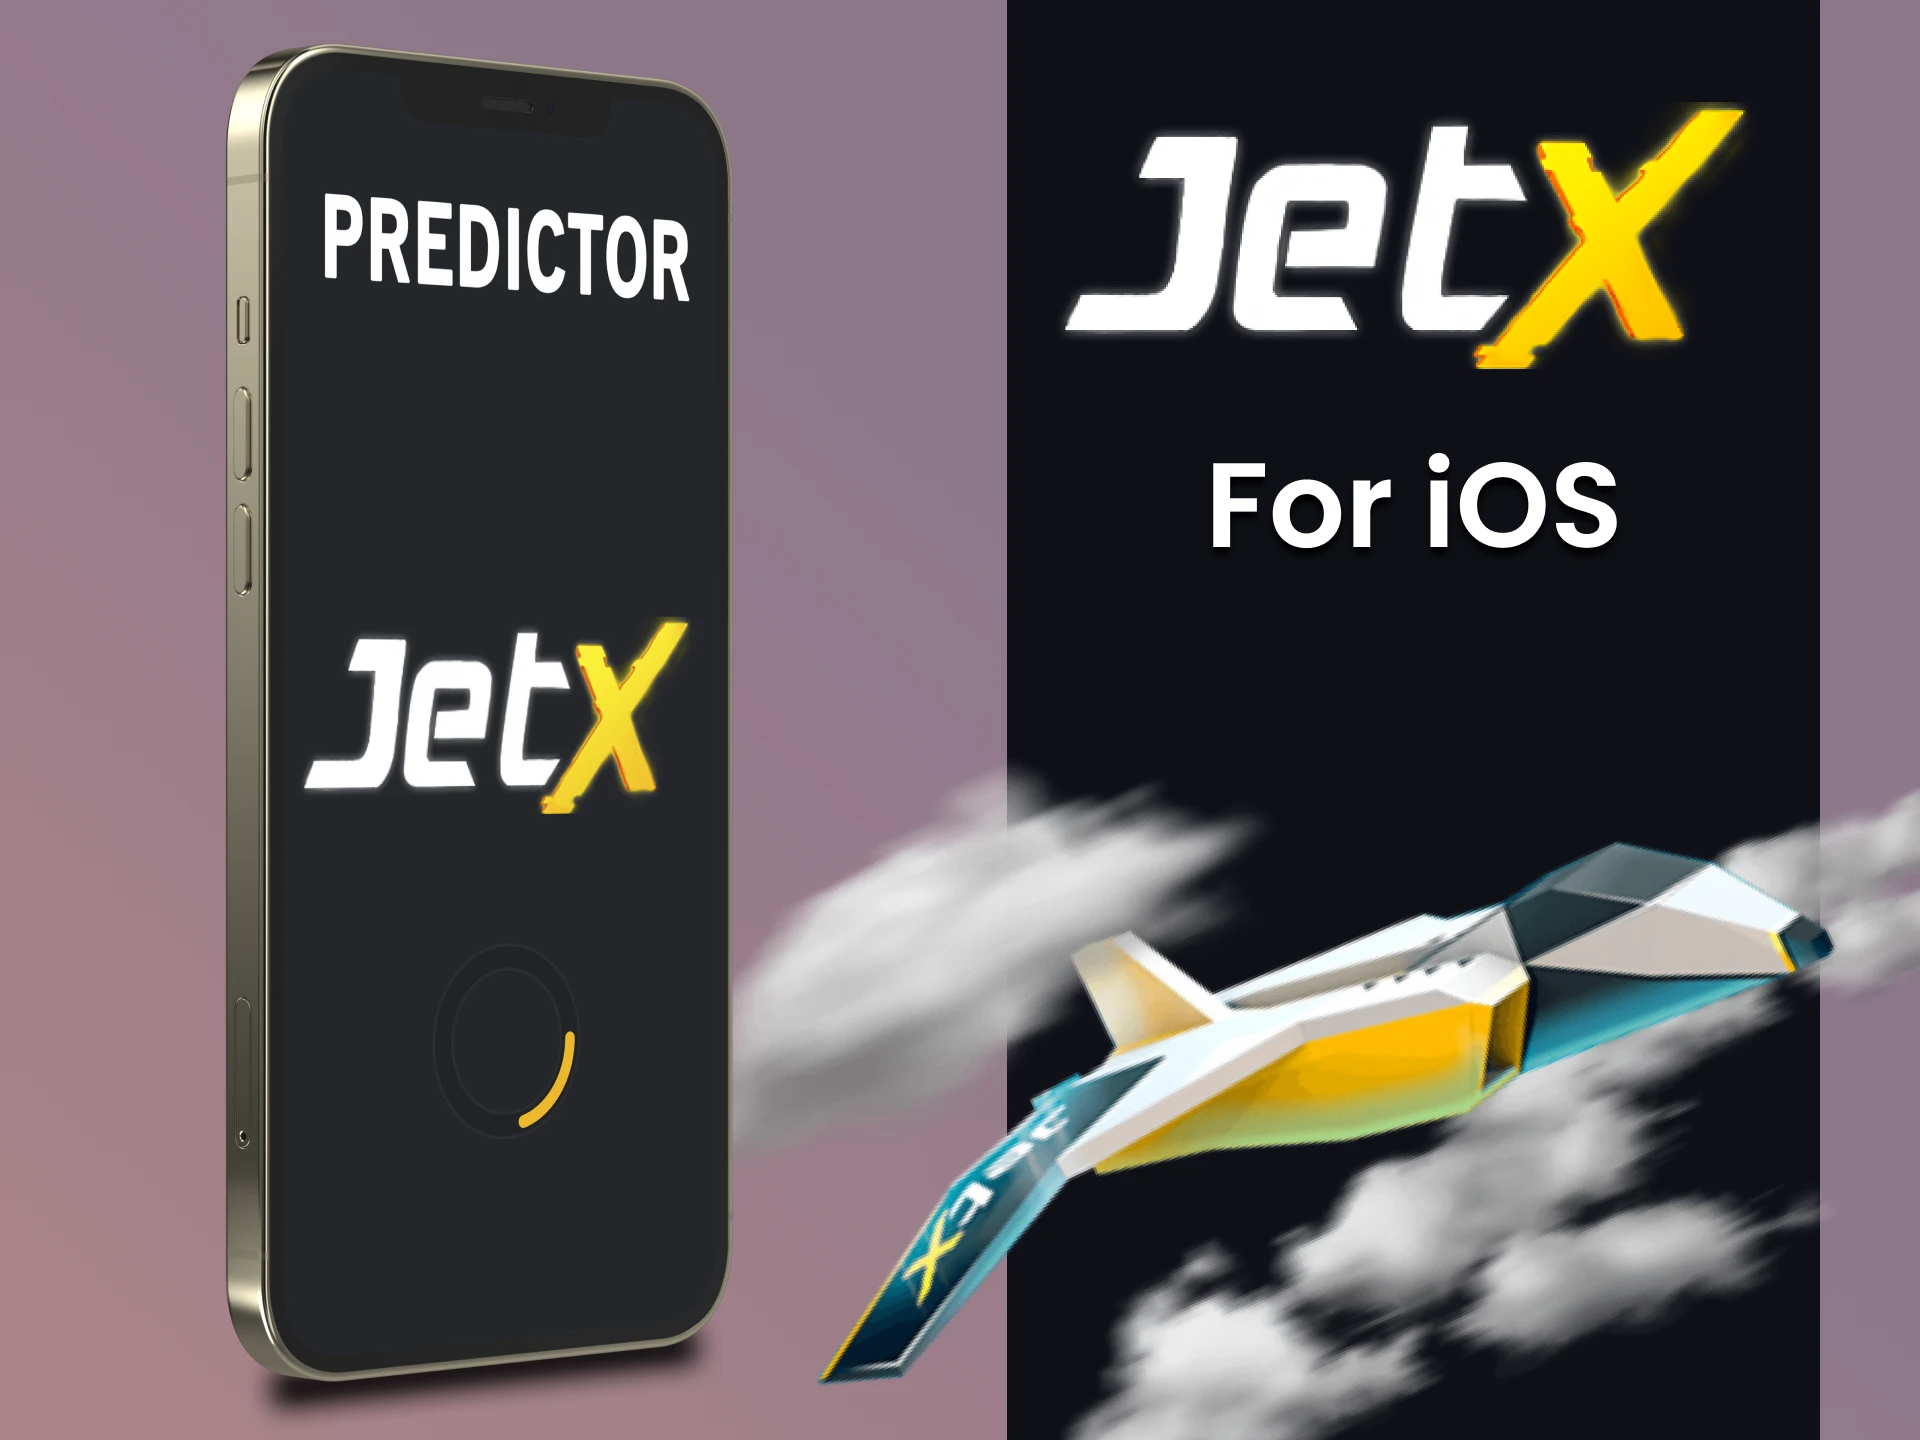 Learn how to install third party software for JetX on iOS.